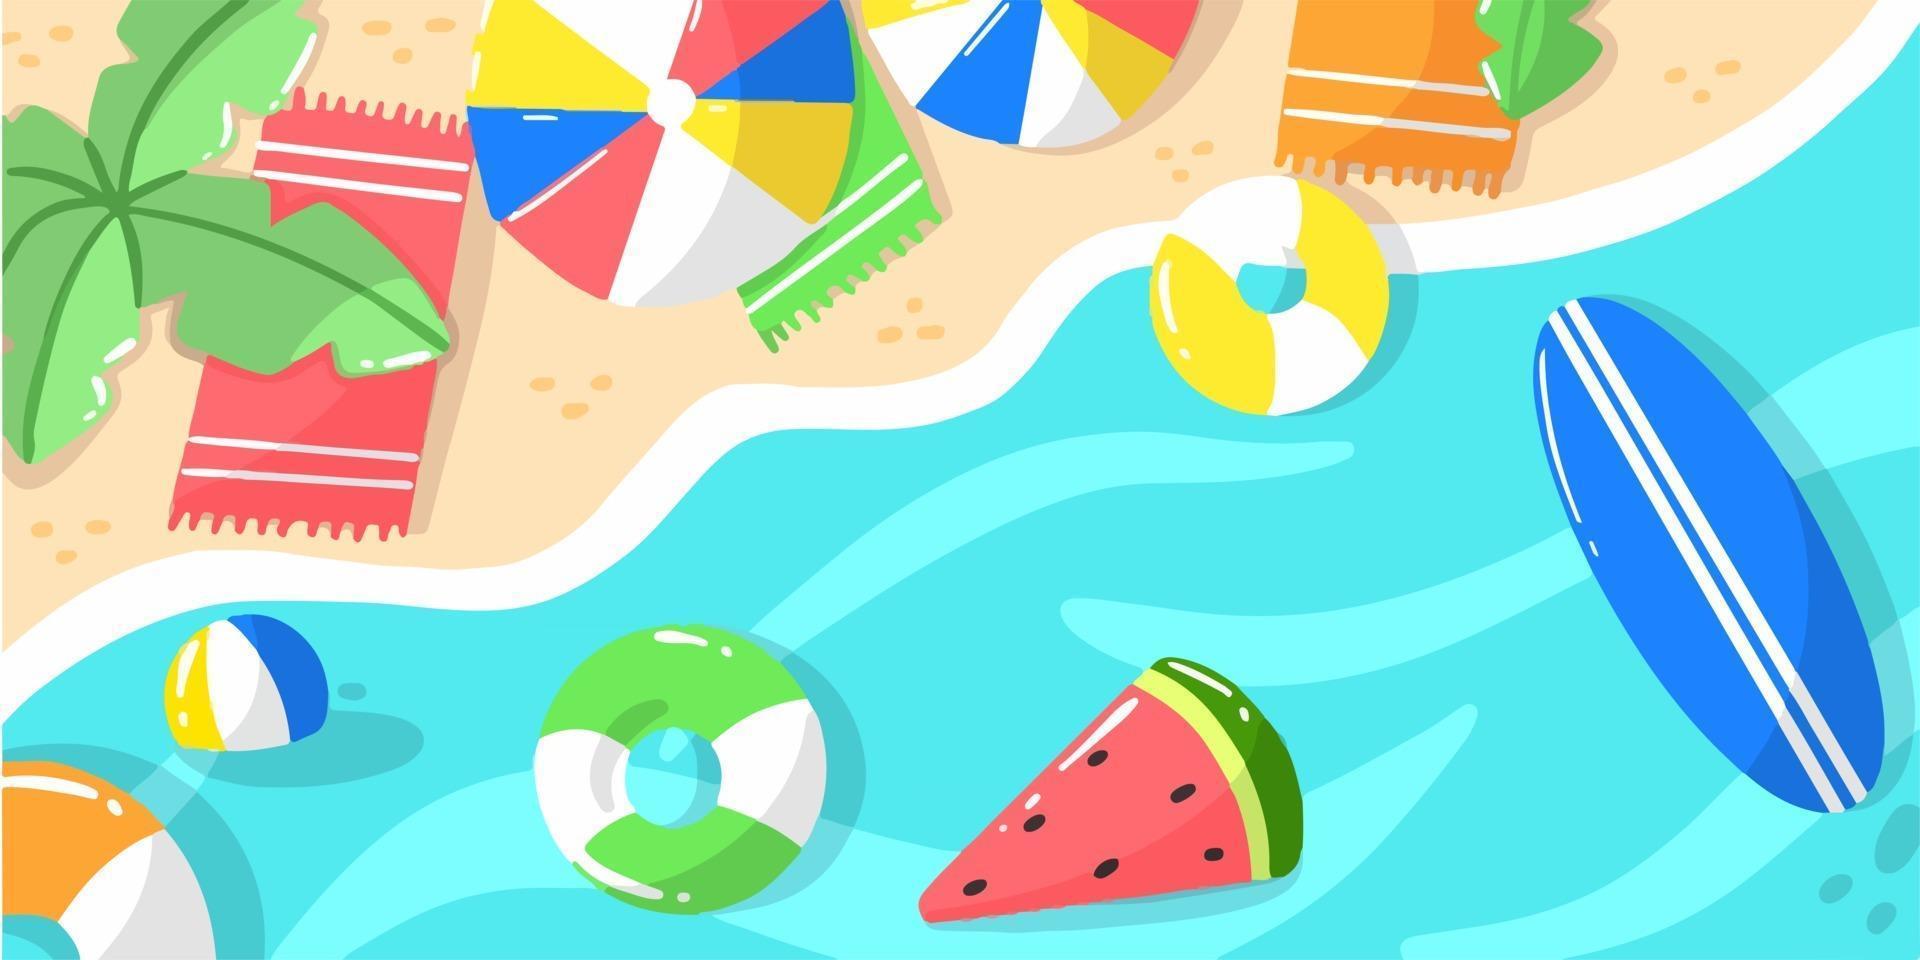 Fun Summer Party At Sandy Beach Doodle Illustration vector